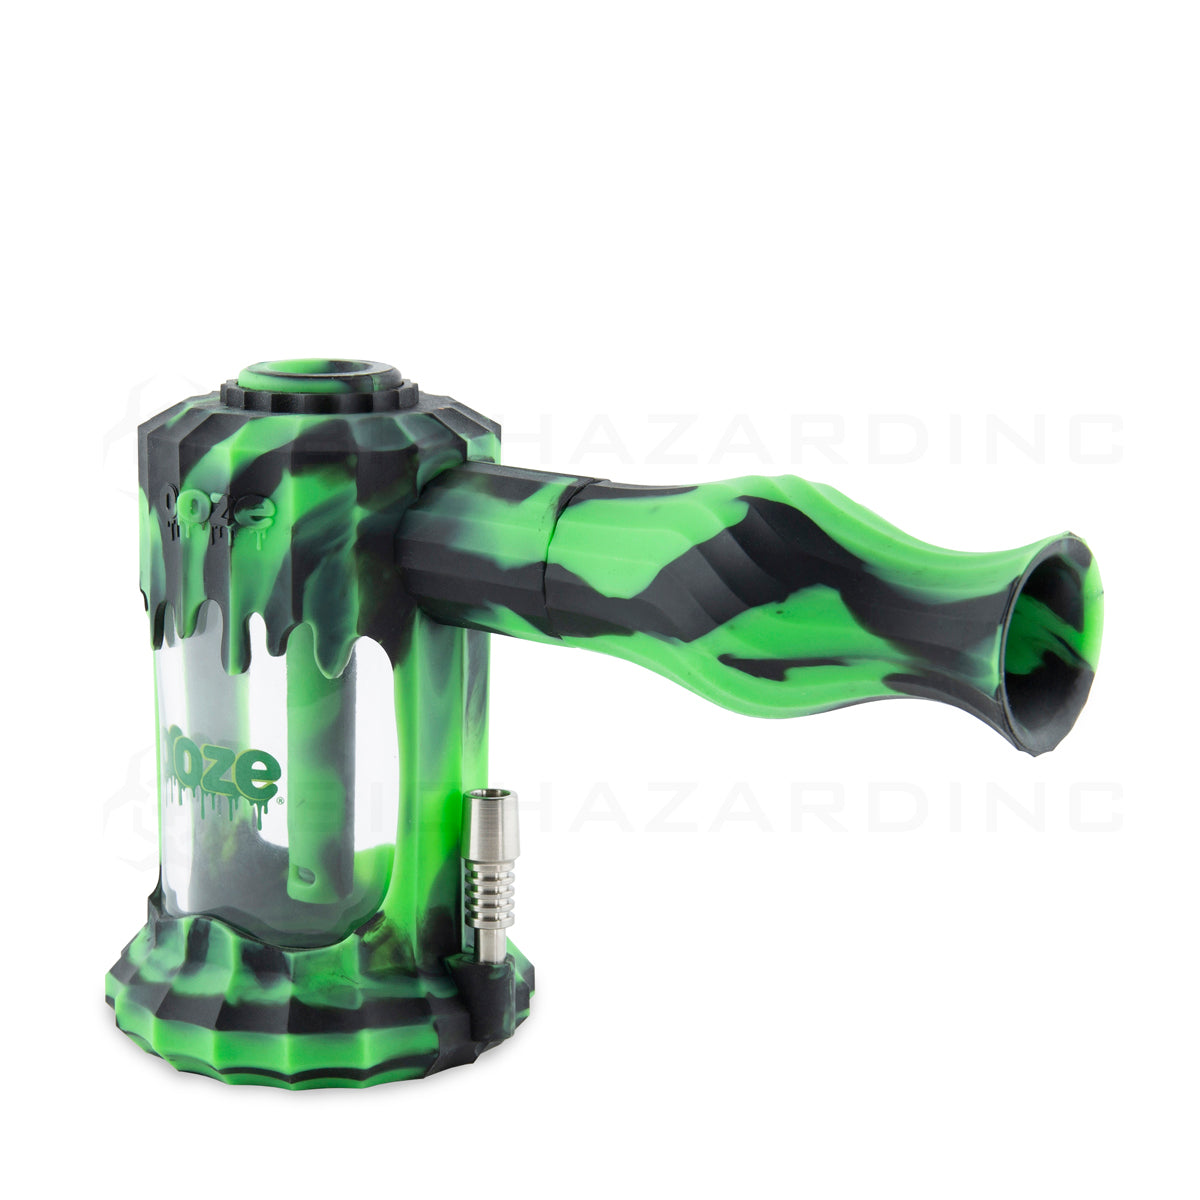 OOZE® | 4-in-1 CLOBB Silicone Nectar Collector & Water Pipe | Various Colors  Ooze   